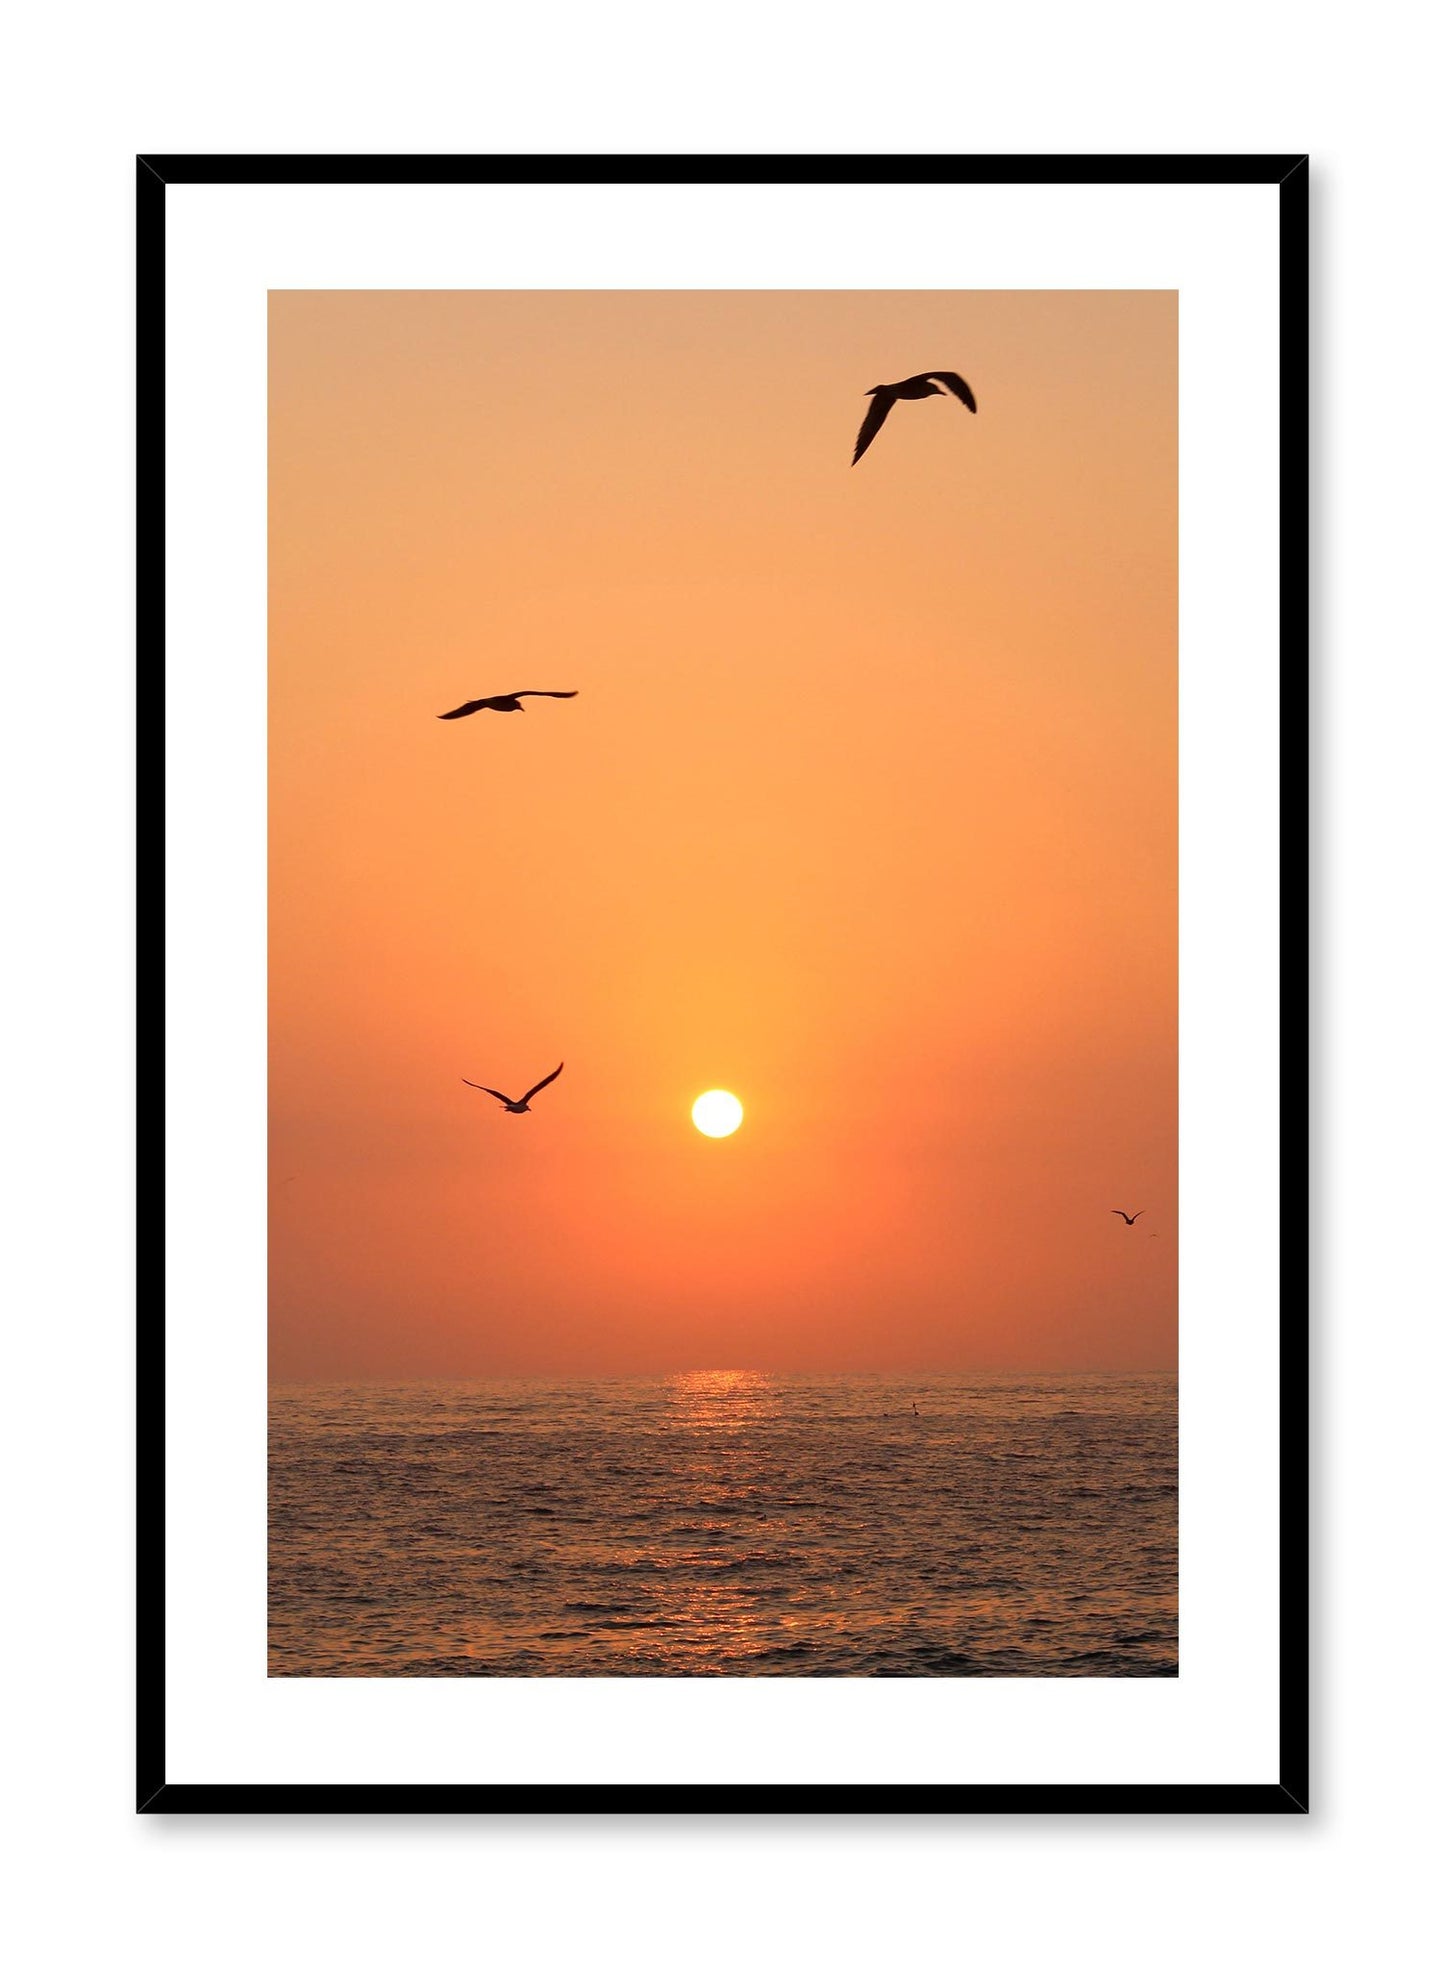 Flying into the Sunset is a minimalist photography of a scenery where three birds are flying above the sea as the orange sun sets by Opposite Wall.